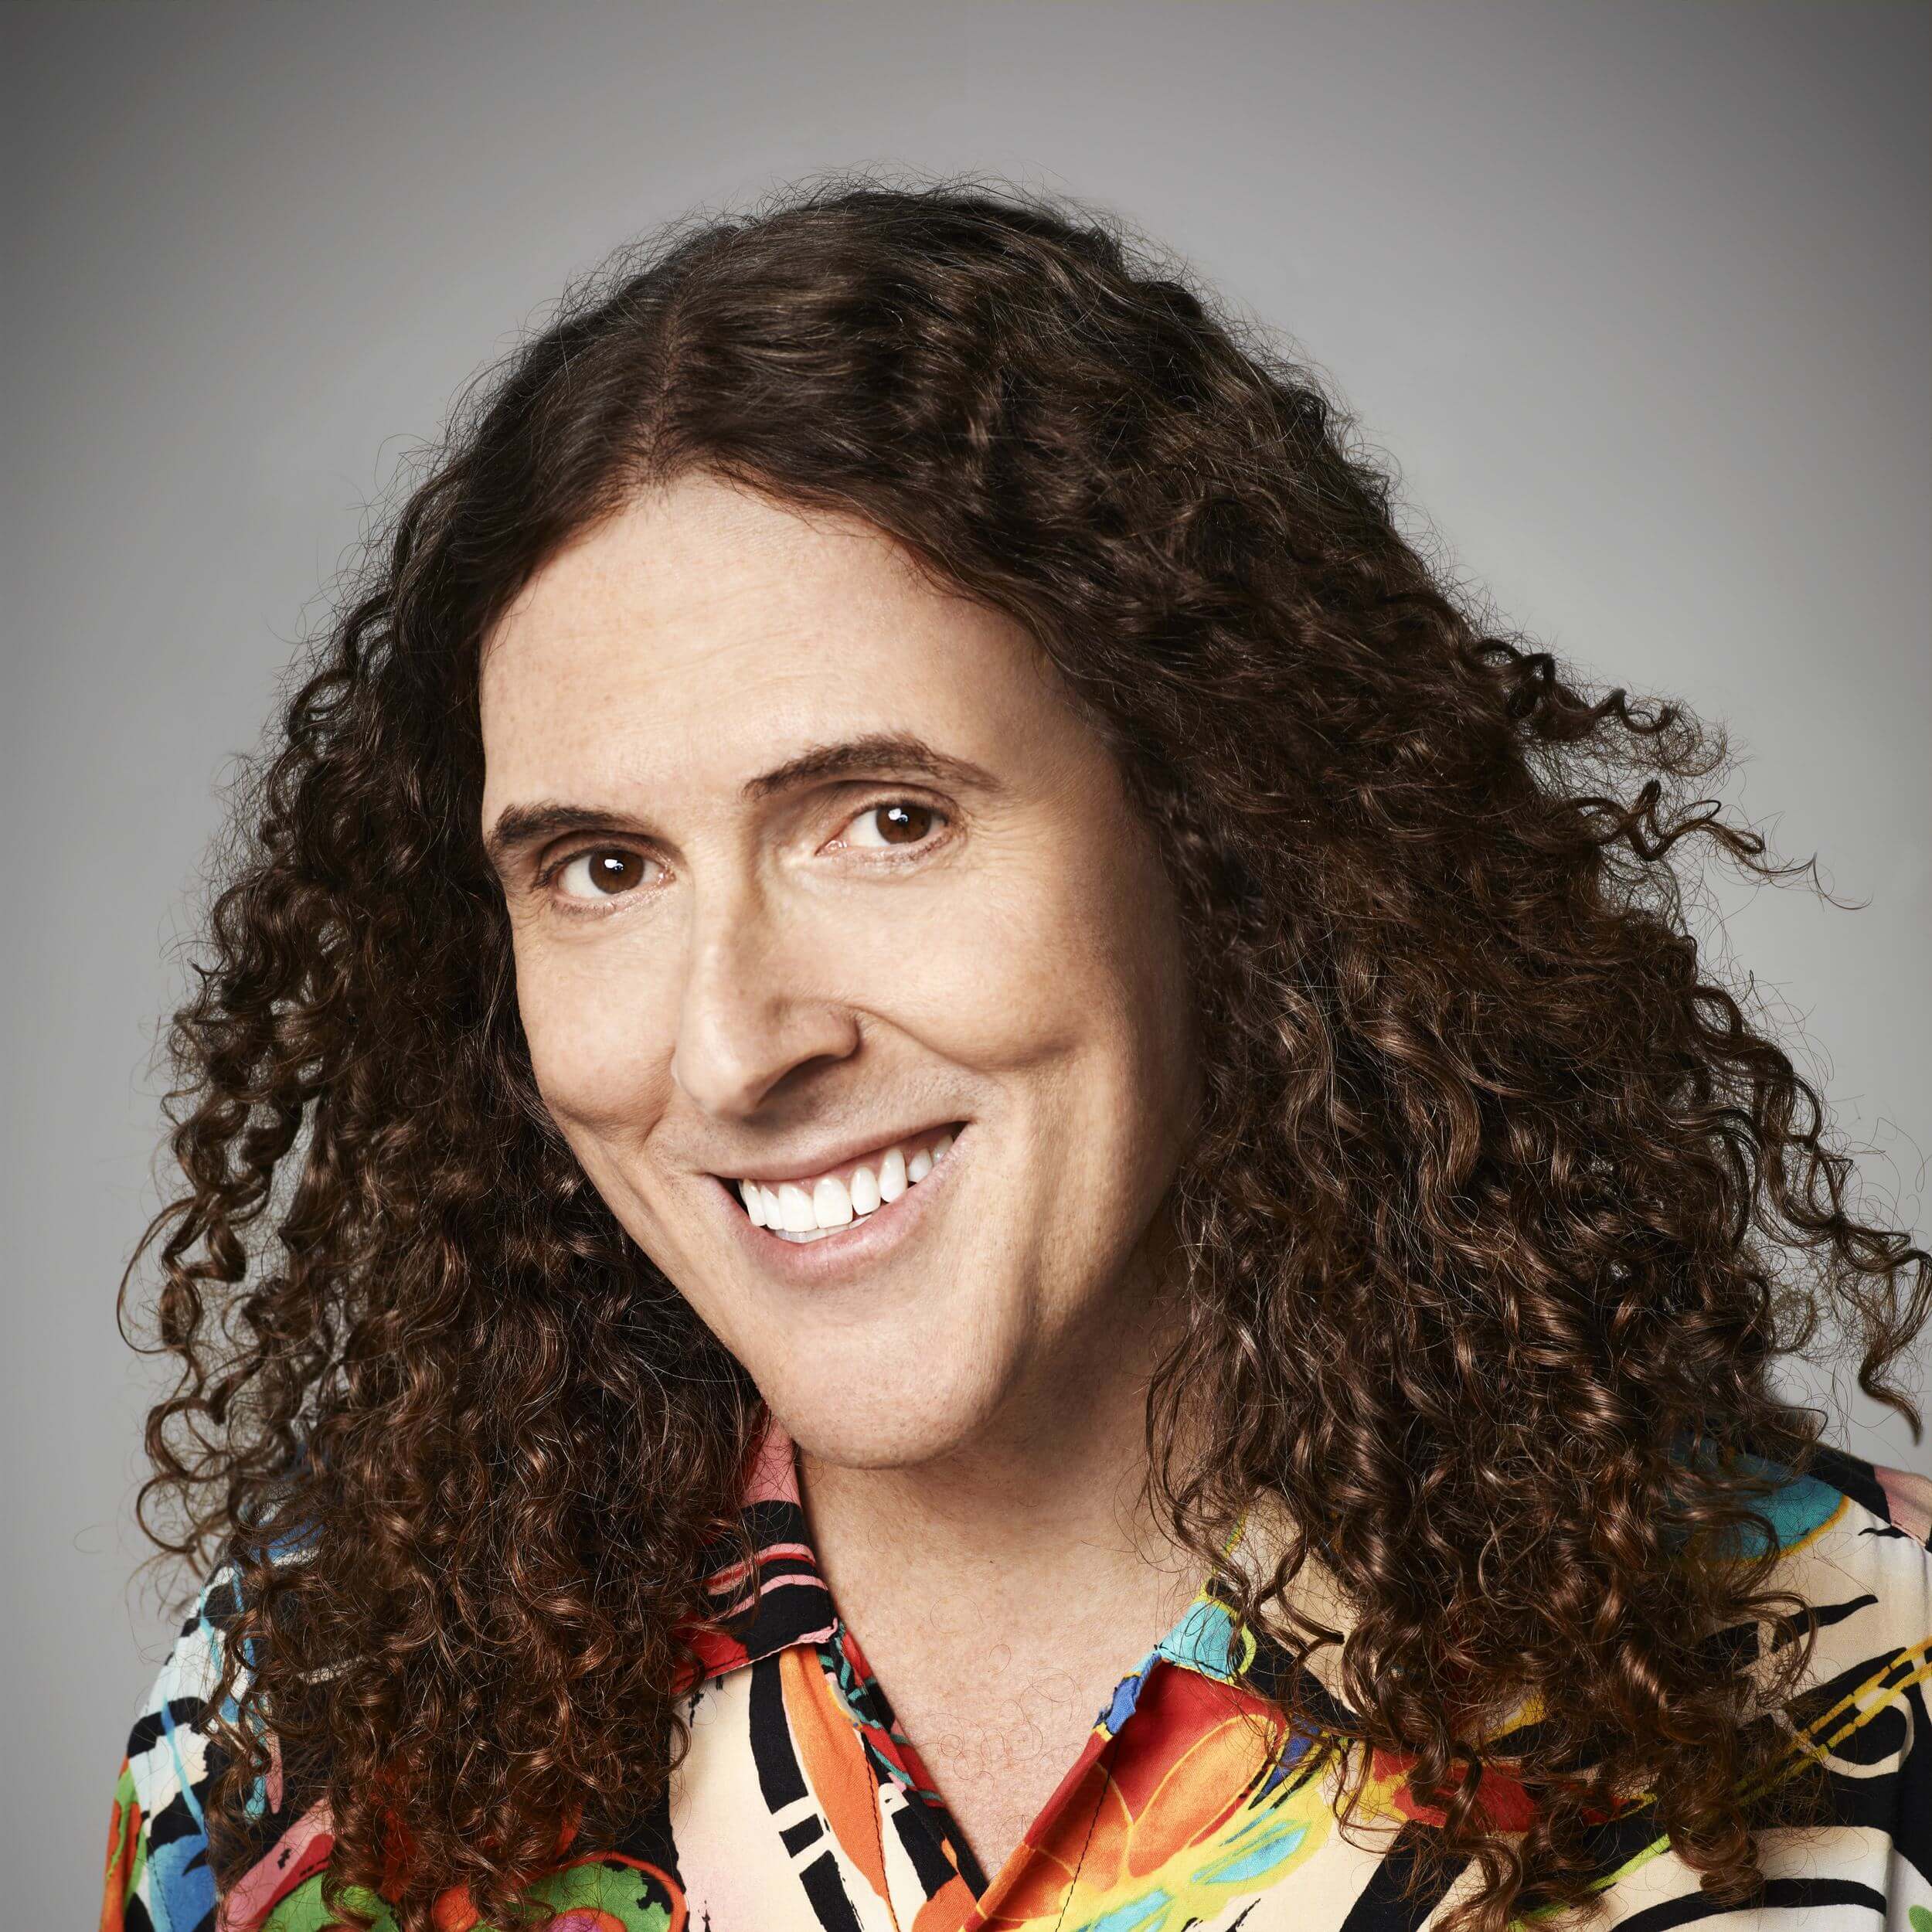 List 98+ Images weird al yankovic, gallo center for the arts, september 16 Stunning